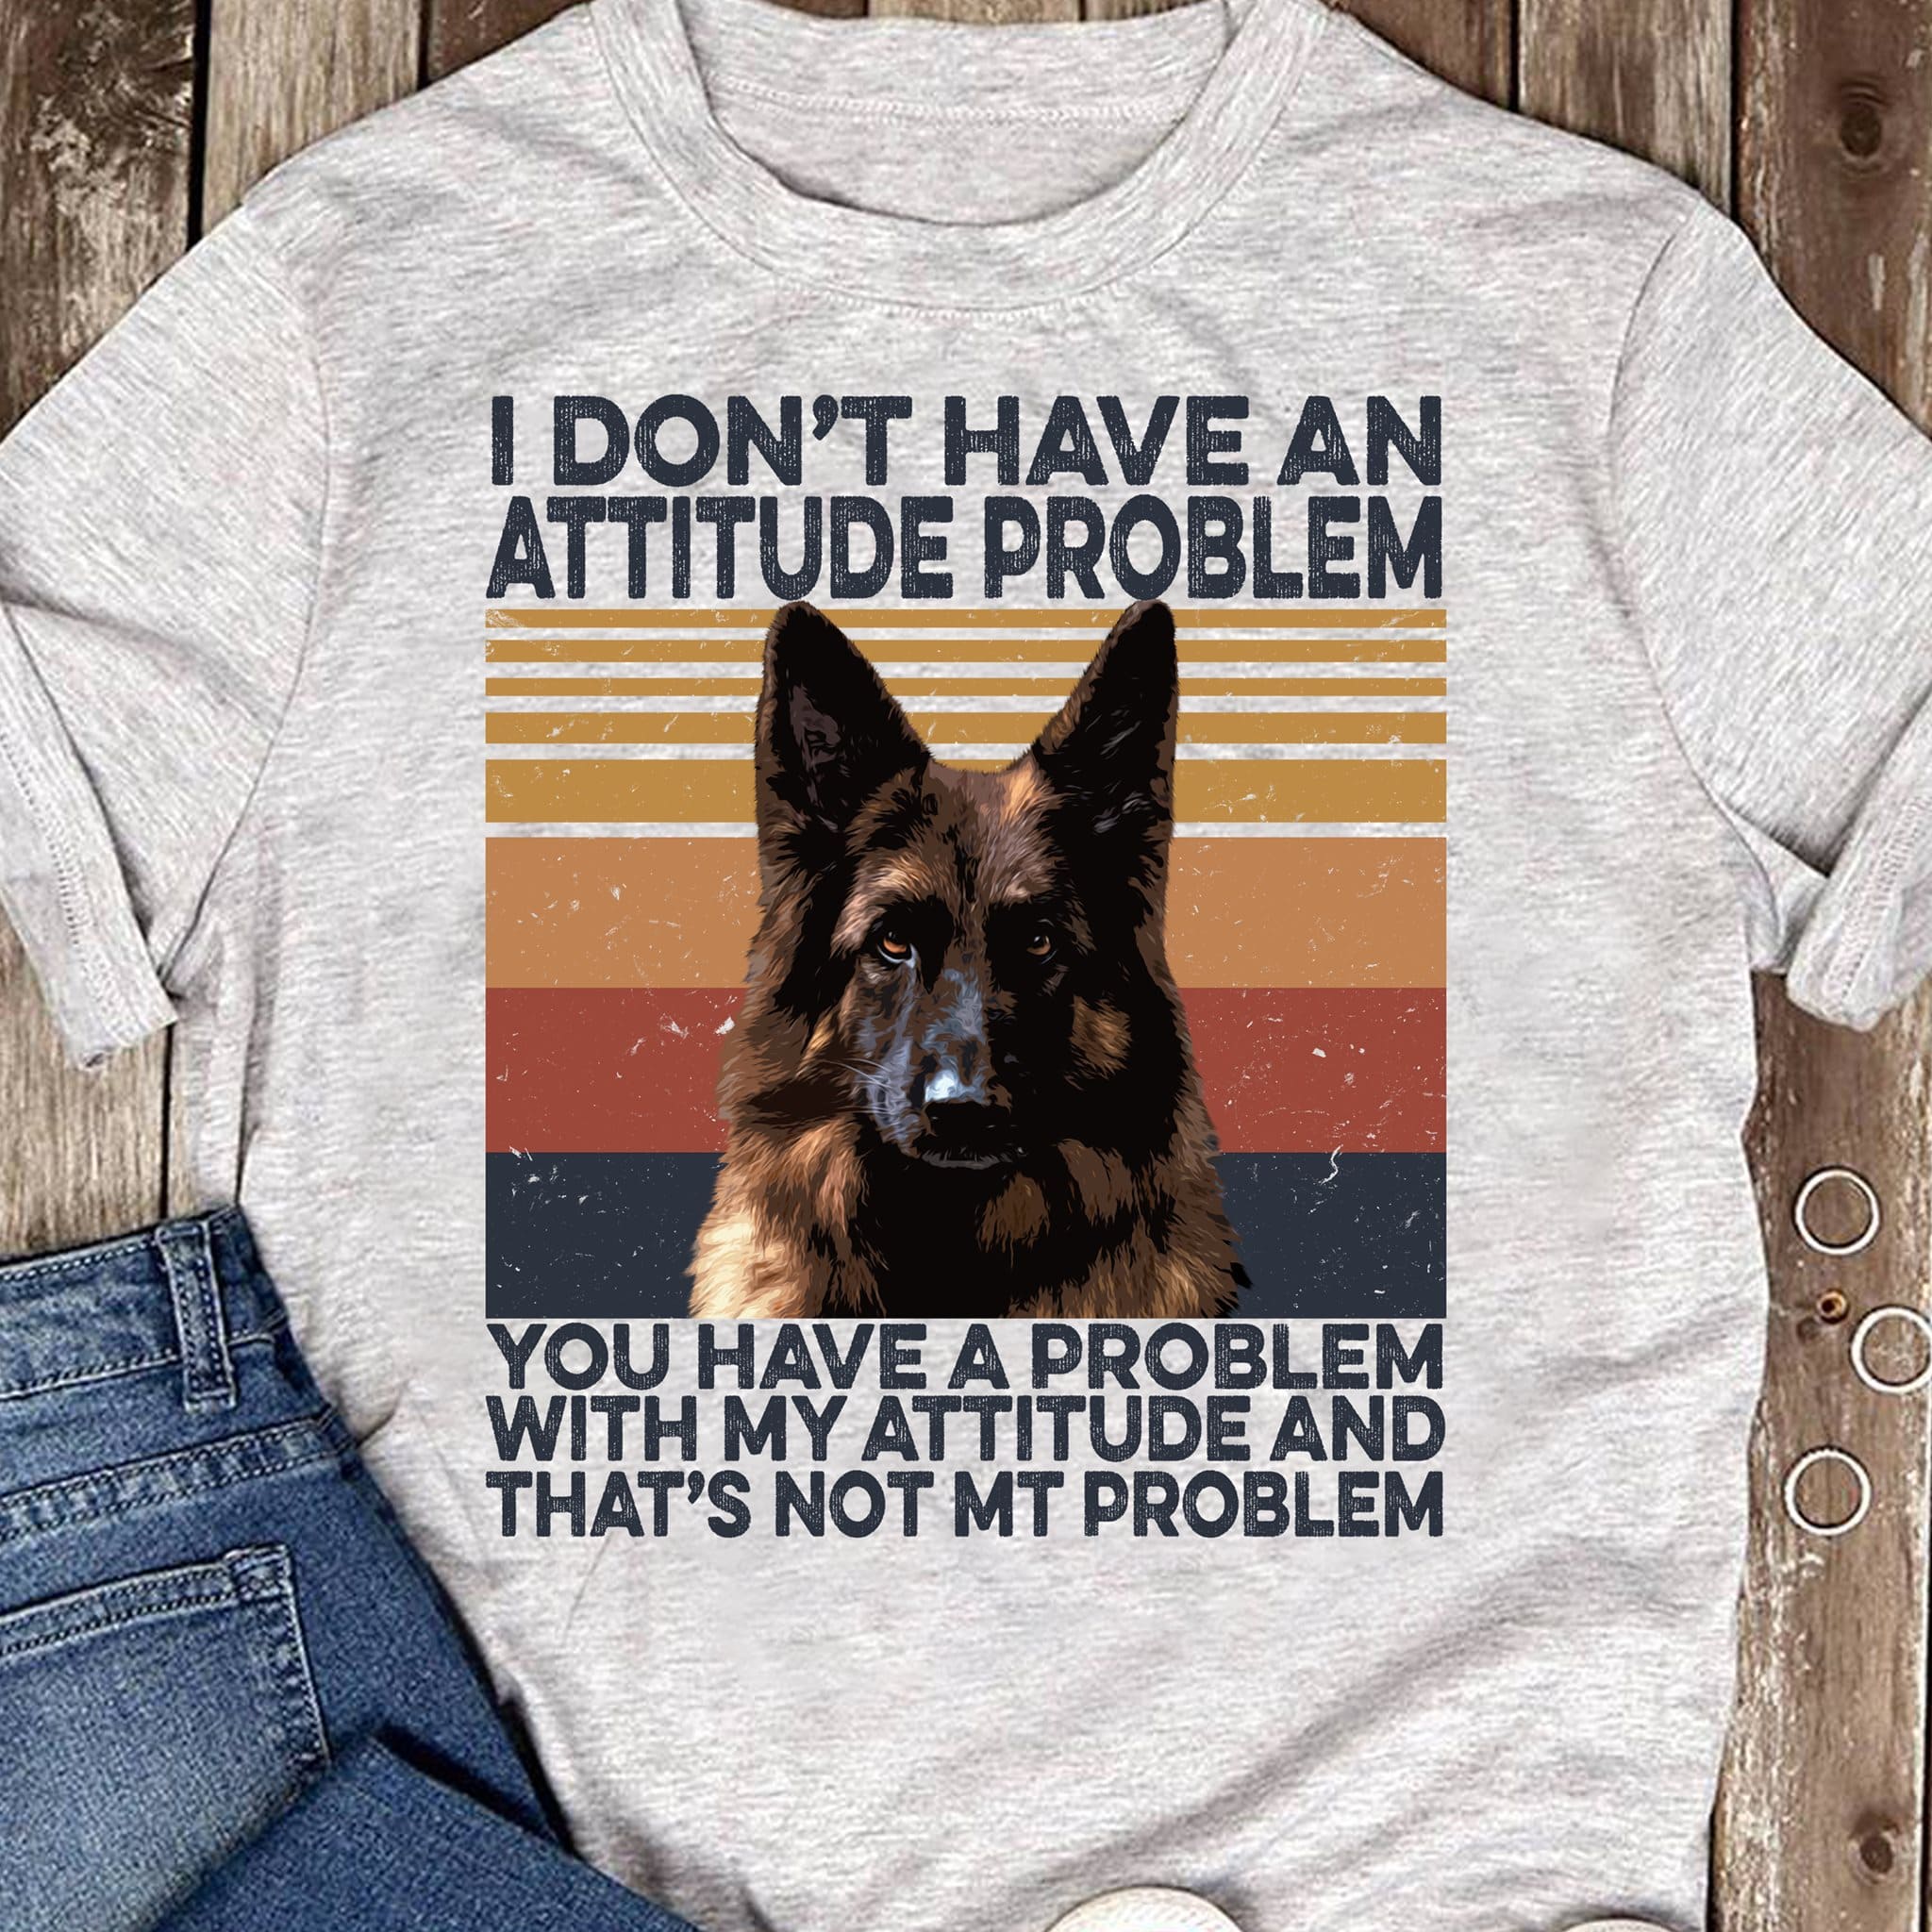 I don't have an attitude problem, you have a problem with my attitude - German shepherd dog